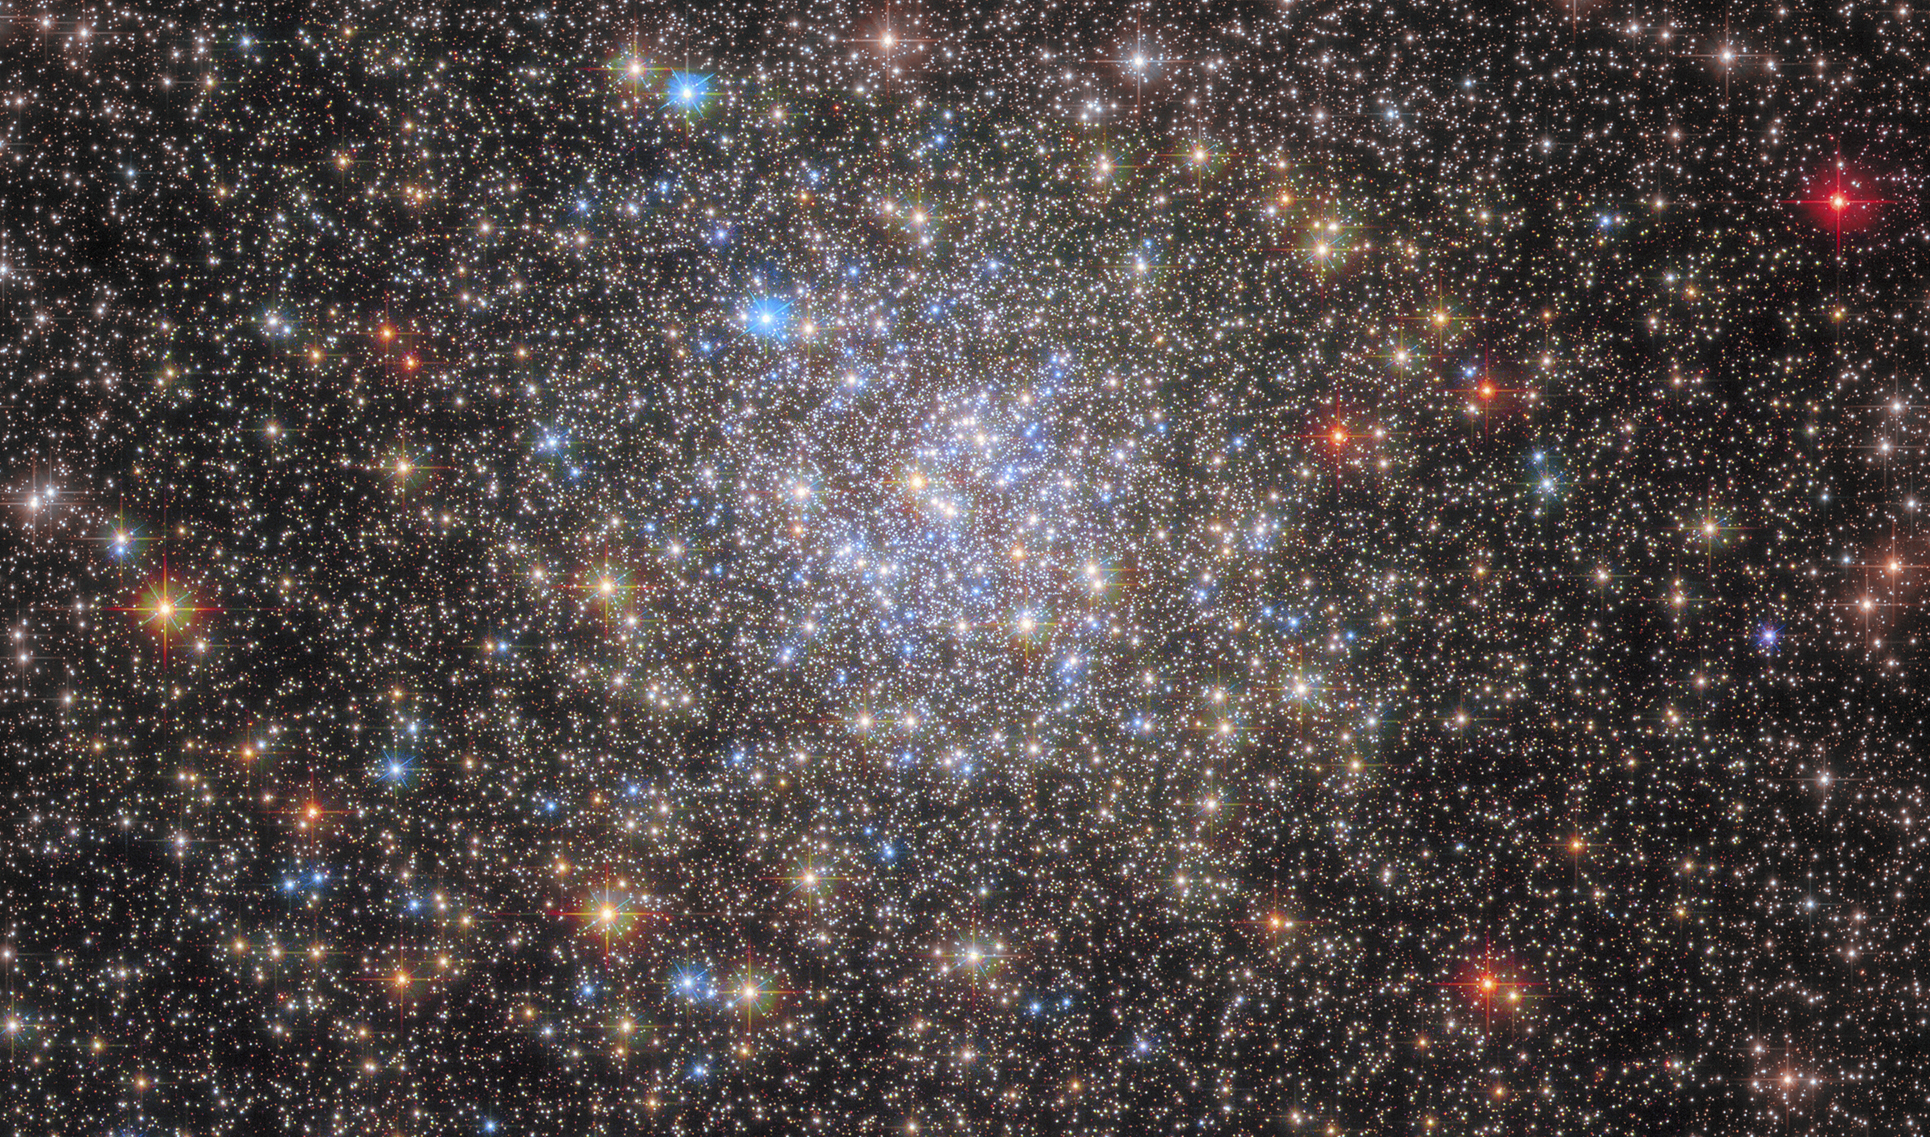 A massive clusta of blue, red, yellow, n' white stars.